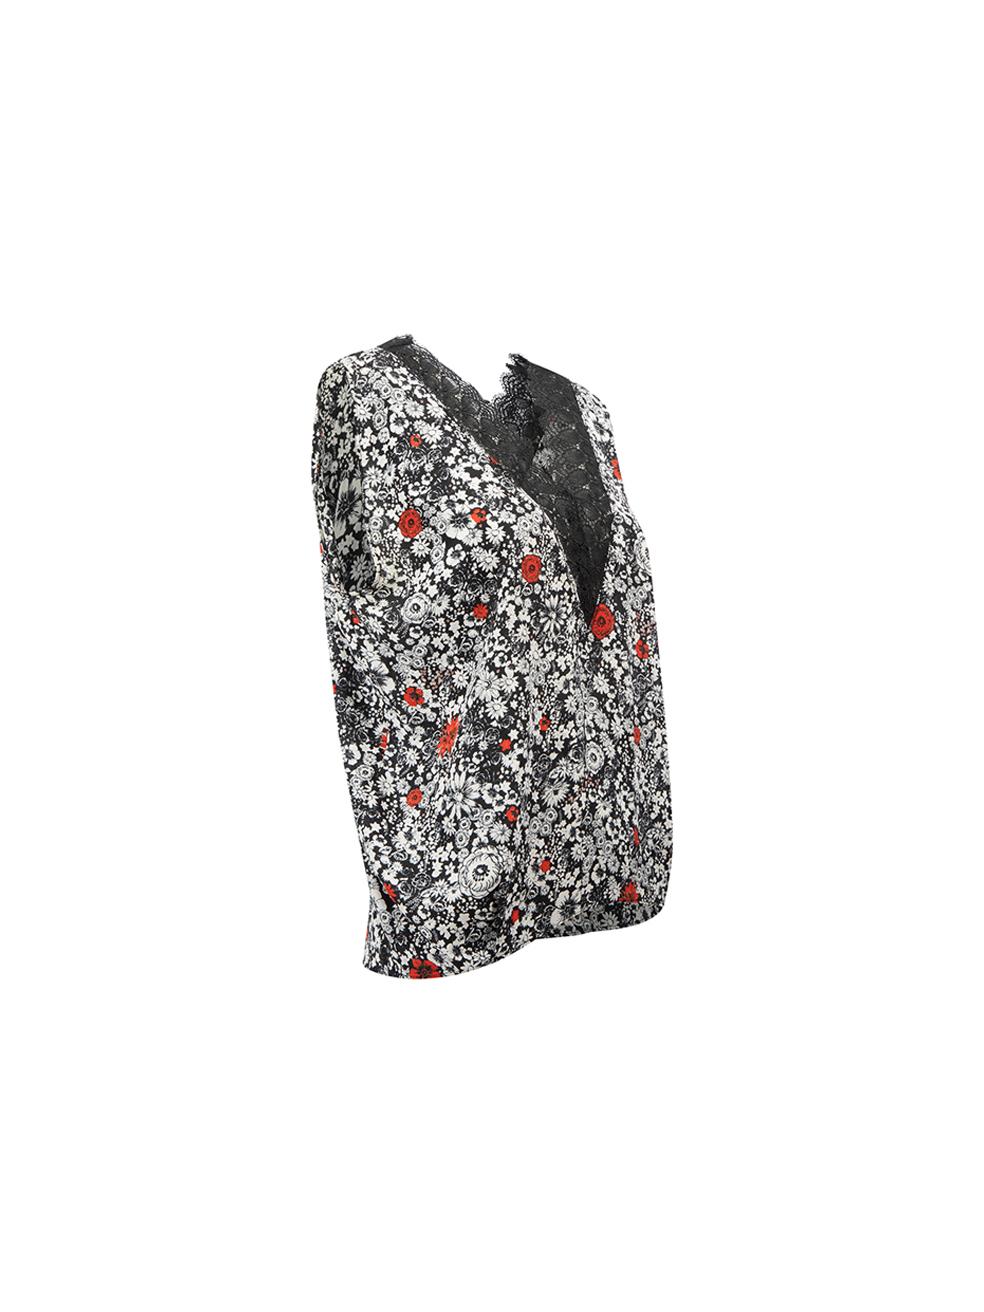 CONDITION is Very good. Hardly any visible wear to top is evident on this used Zadig & Voltaire designer resale item.




Details


Multicolour

Silk

Sleeveless top

Floral print pattern

V neckline

Black lace trimmings





Made in